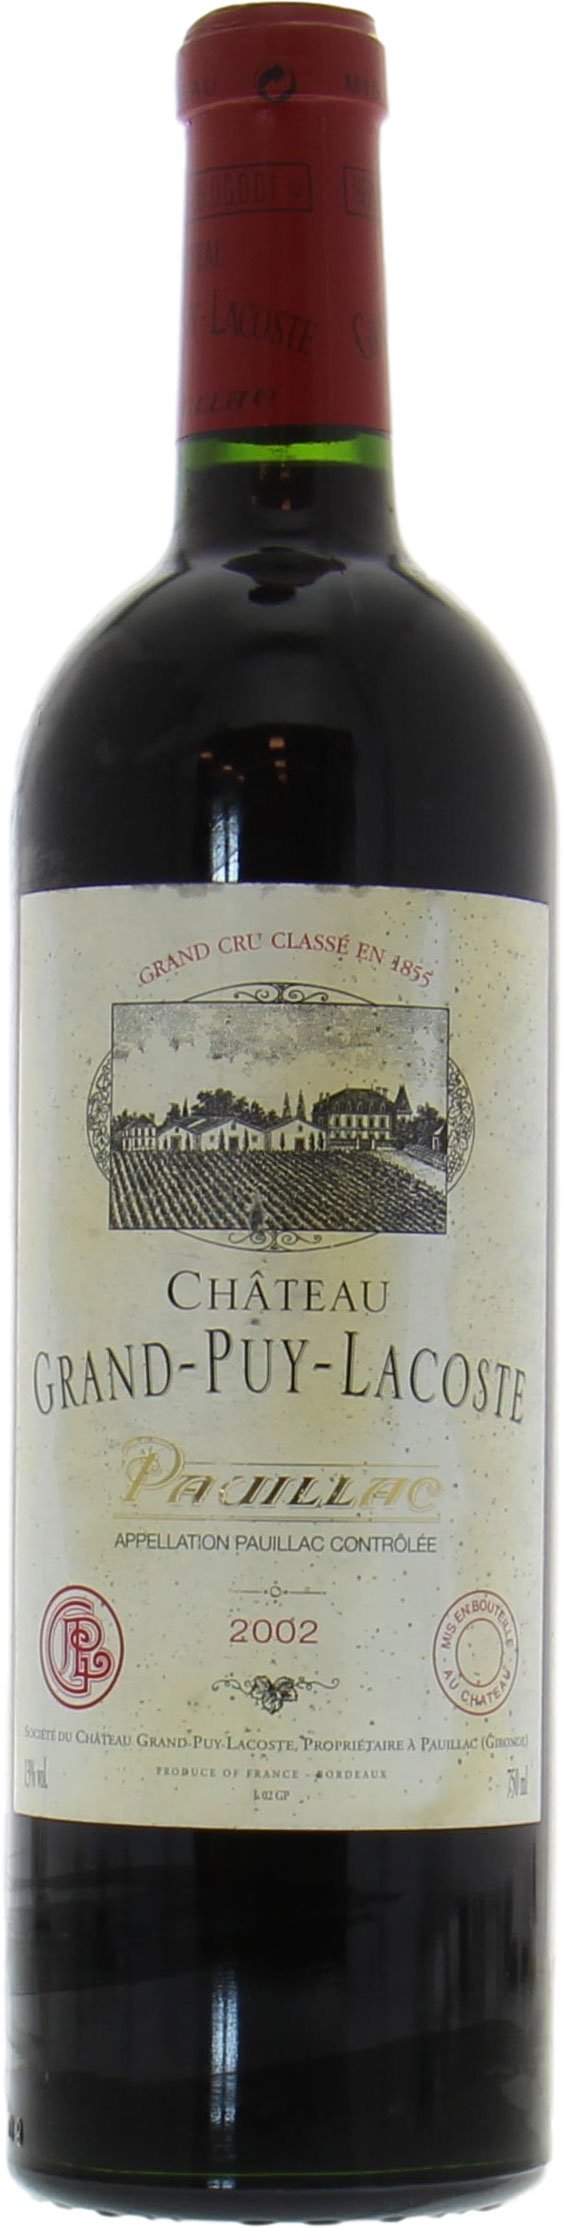 Chateau Grand Puy Lacoste - Chateau Grand Puy Lacoste 2002 Perfect